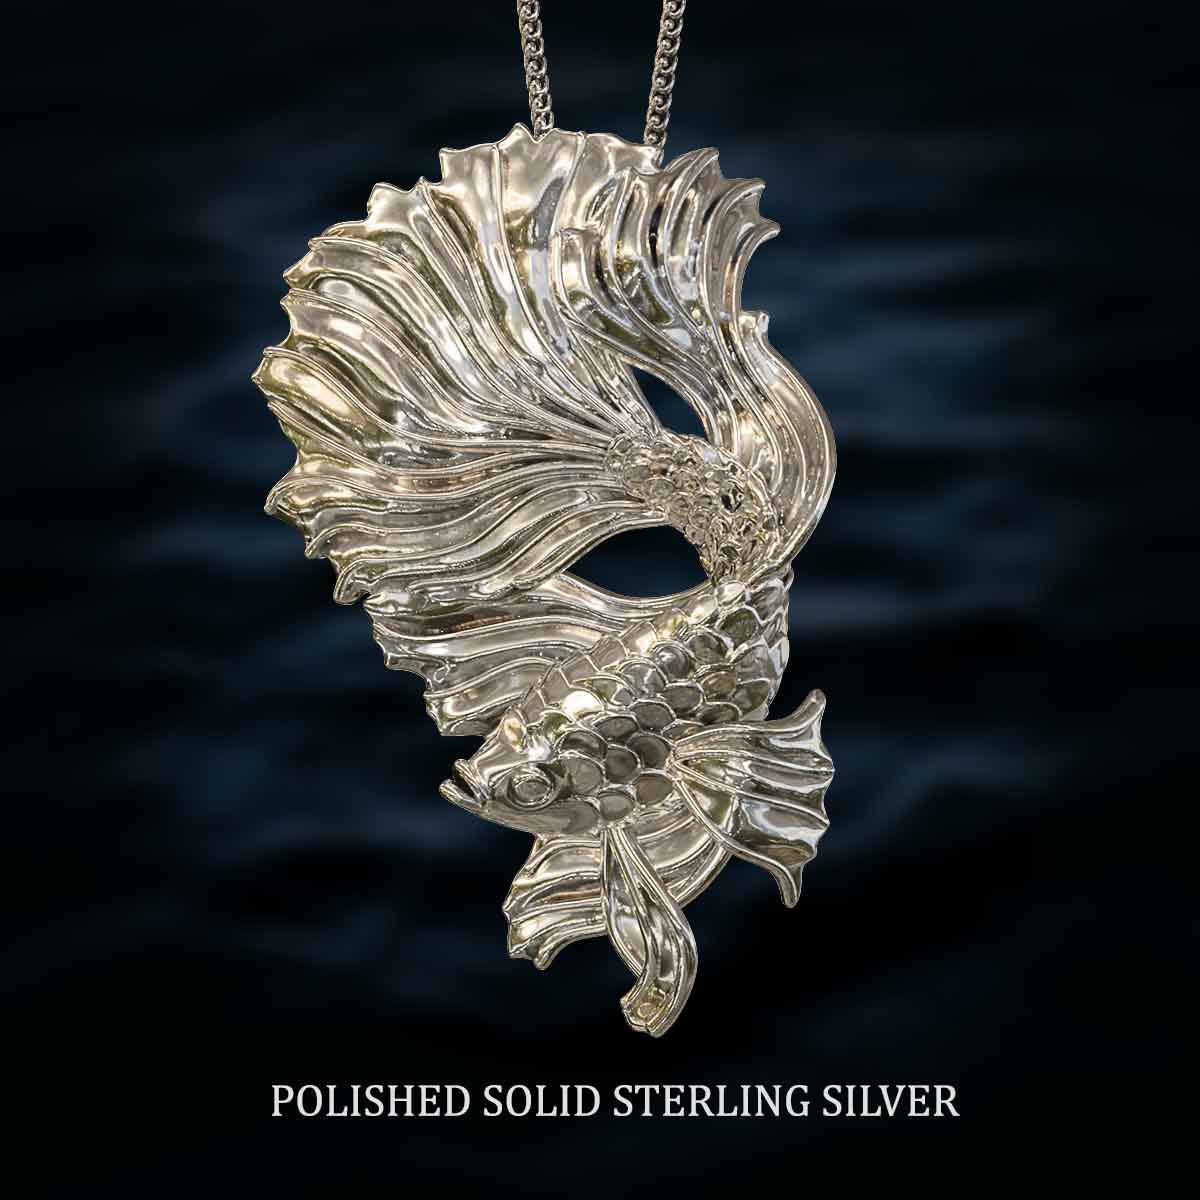     Polished-Solid-Sterling-Silver-Betta-Fish-Pendant-Jewelry-For-Necklace